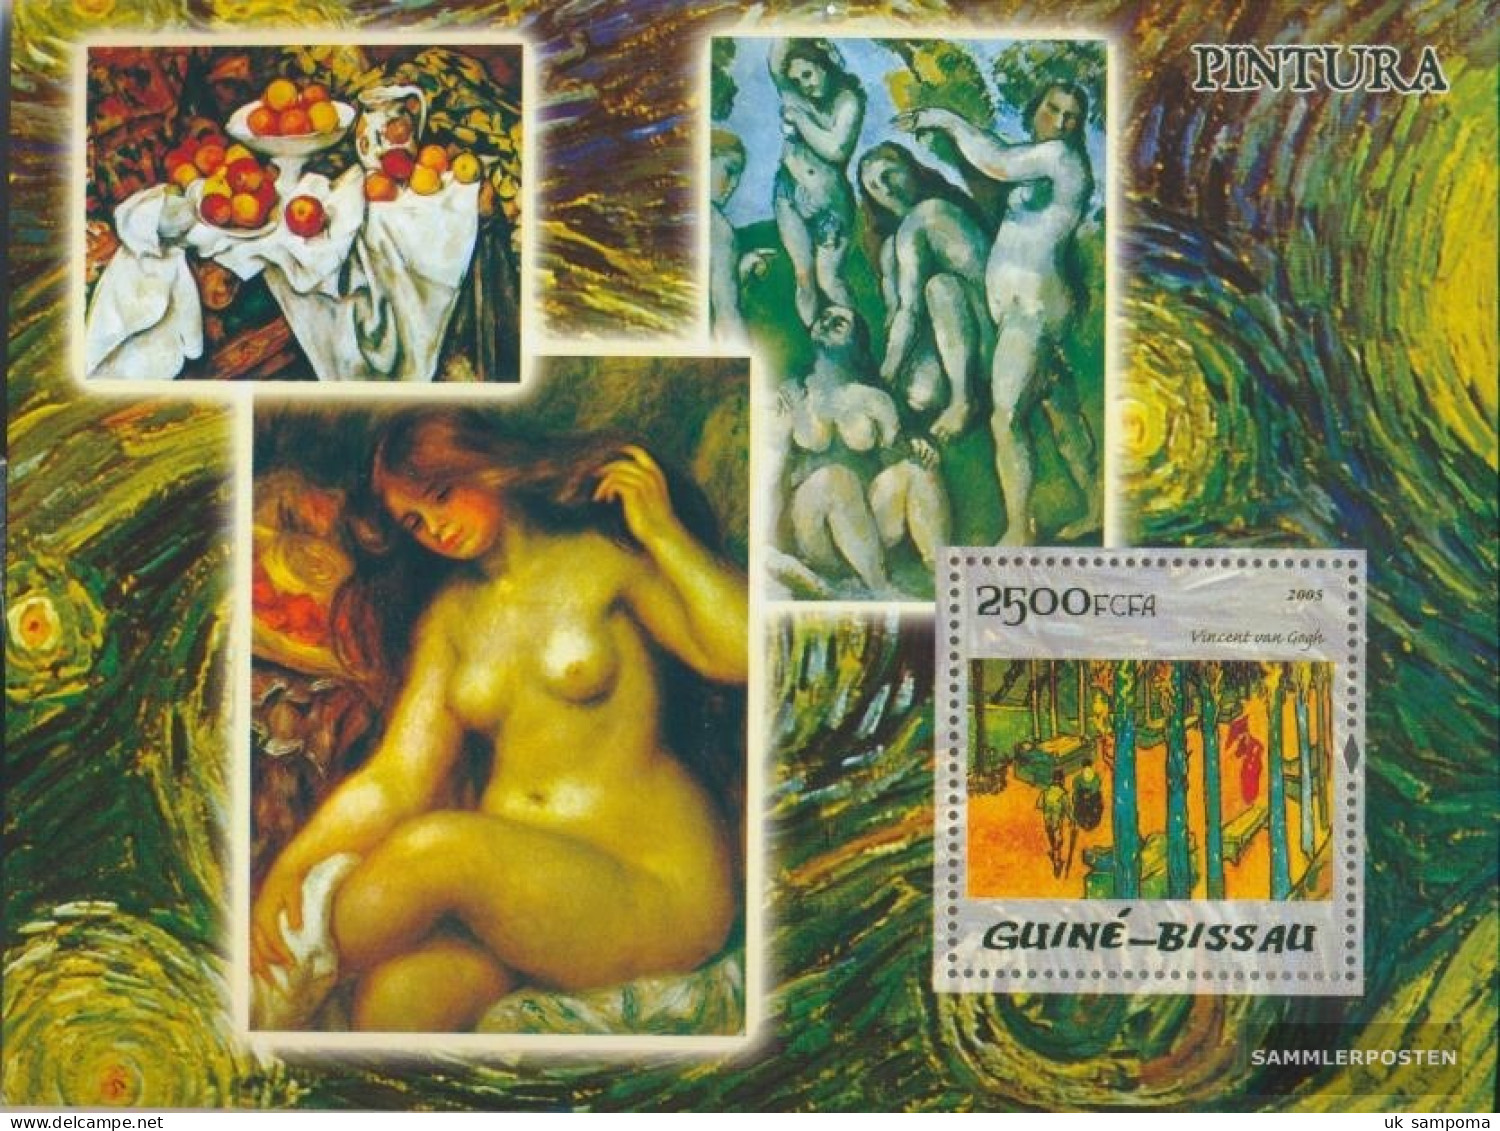 Guinea-Bissau Miniature Sheet 473 (complete. Issue) Unmounted Mint / Never Hinged 2005 Paintings (Impressionists) - Guinea-Bissau